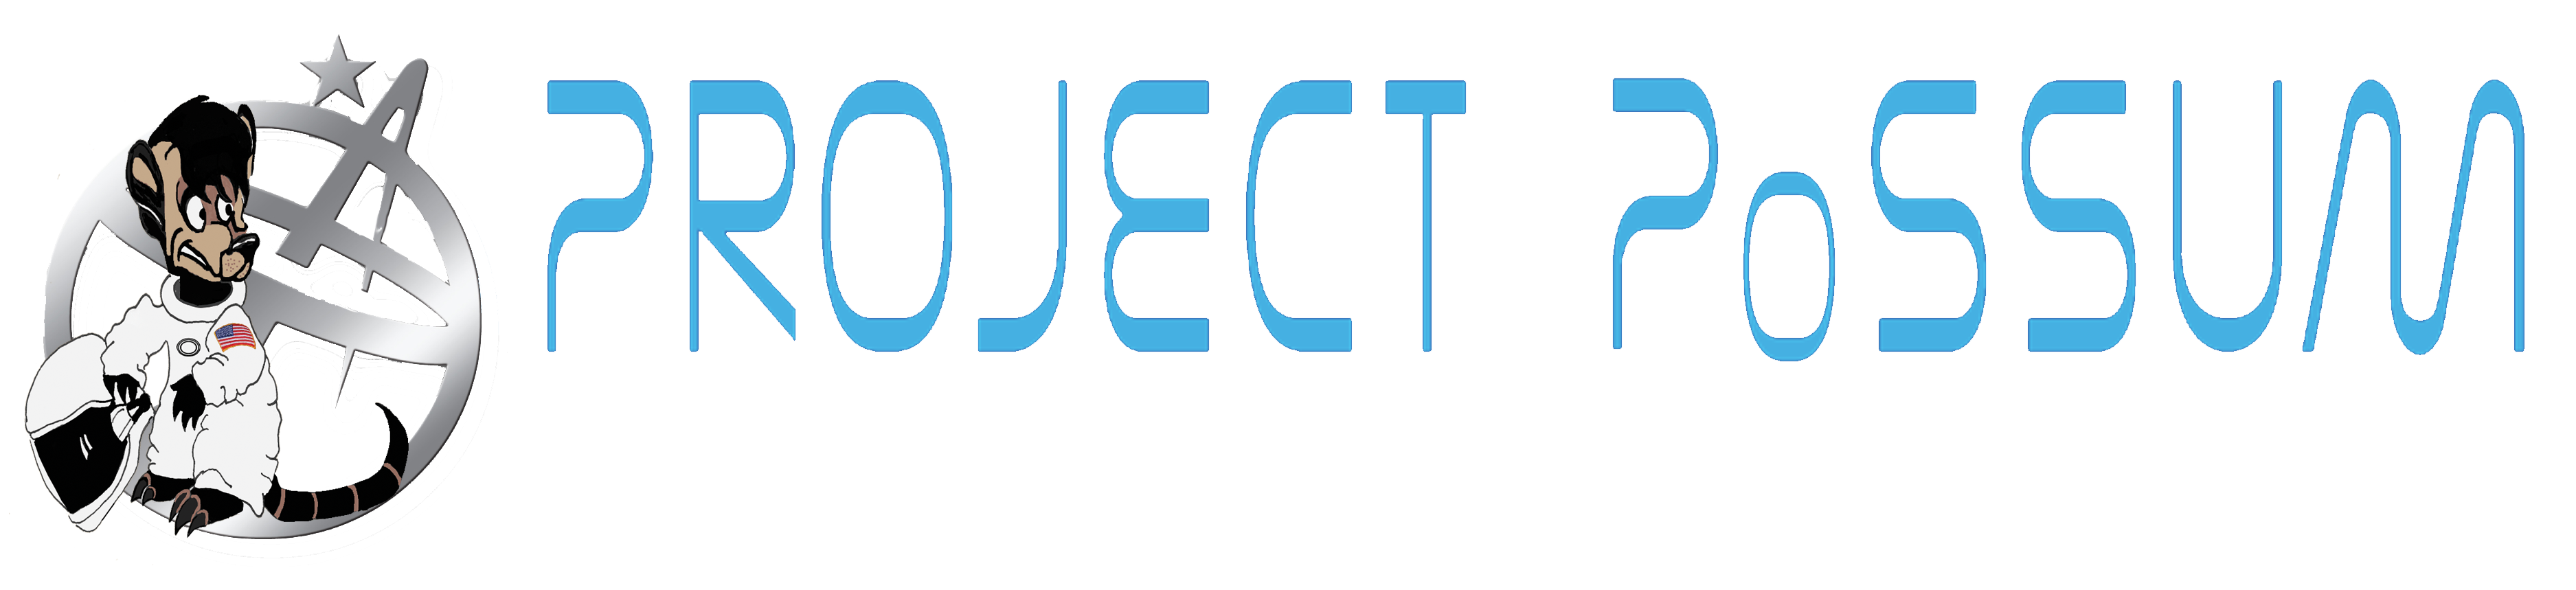 The Aeronomy Research Program of the International Institute for Astronautical Sciences